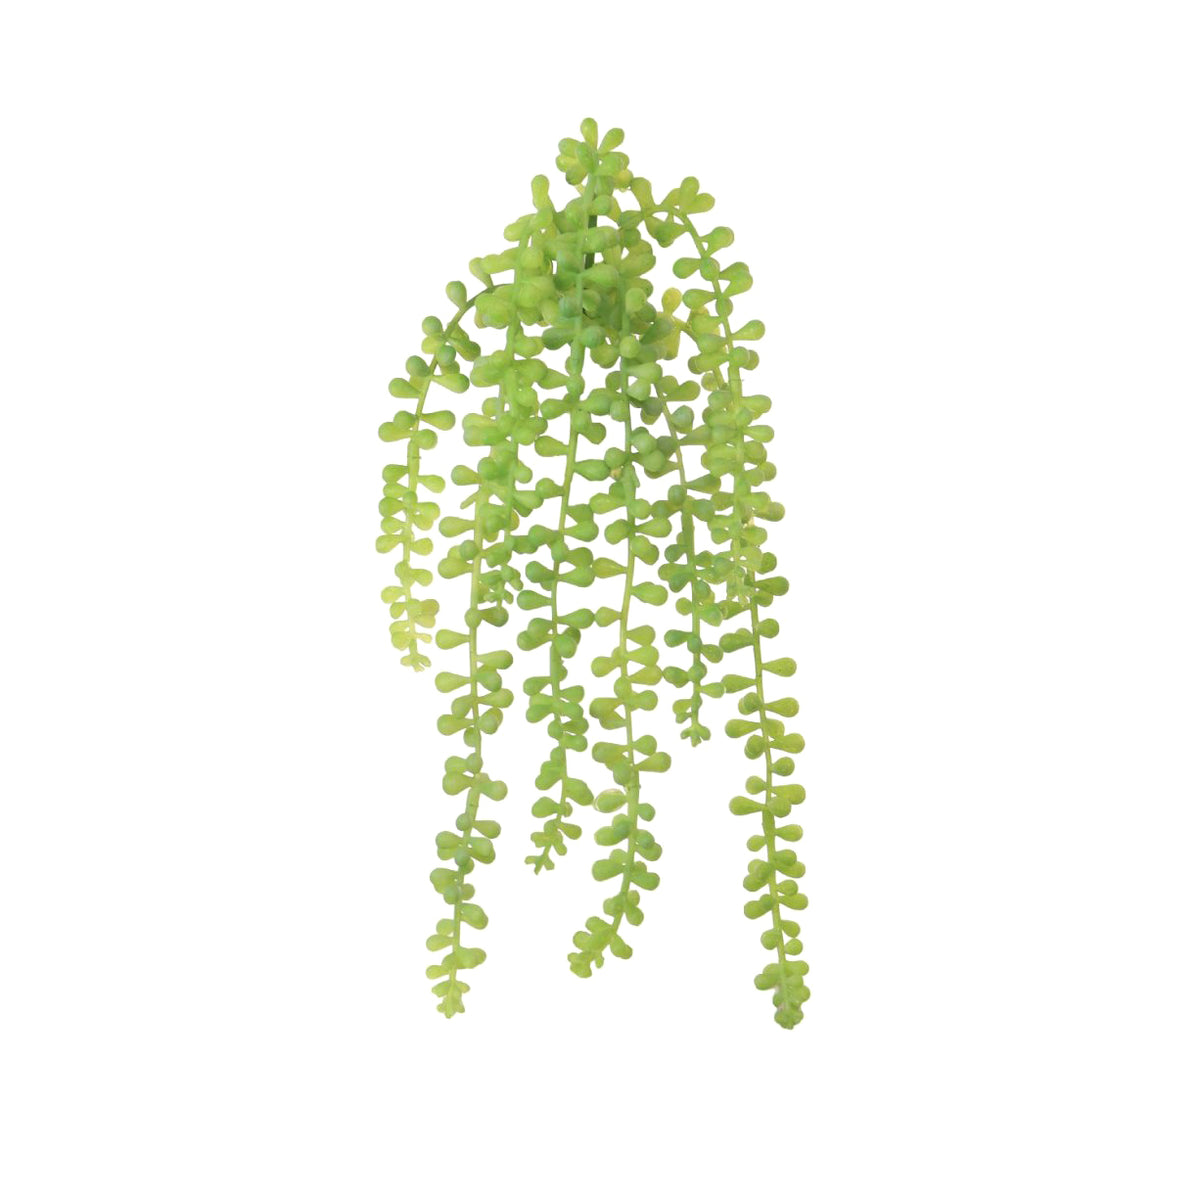 Faux Trailing String of Pearls Succulent - 30cm